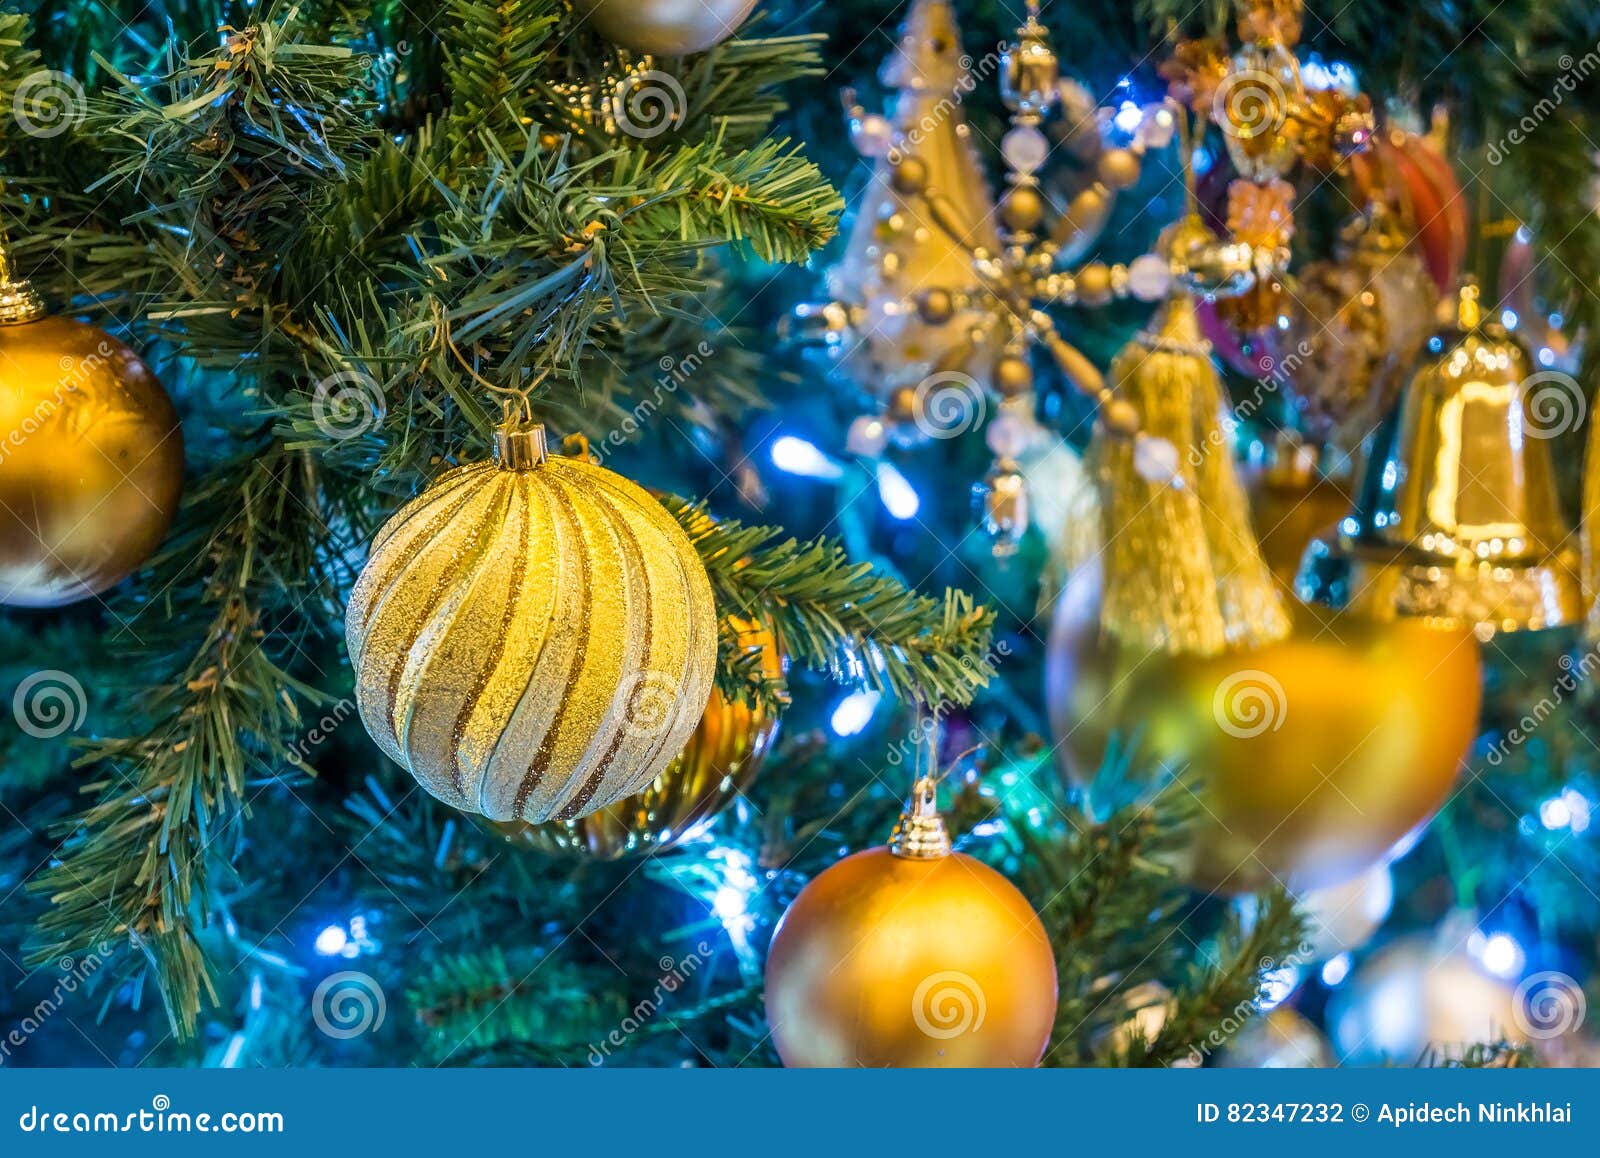 Gold Christmas Baubles on Branch Stock Photo - Image of green ...